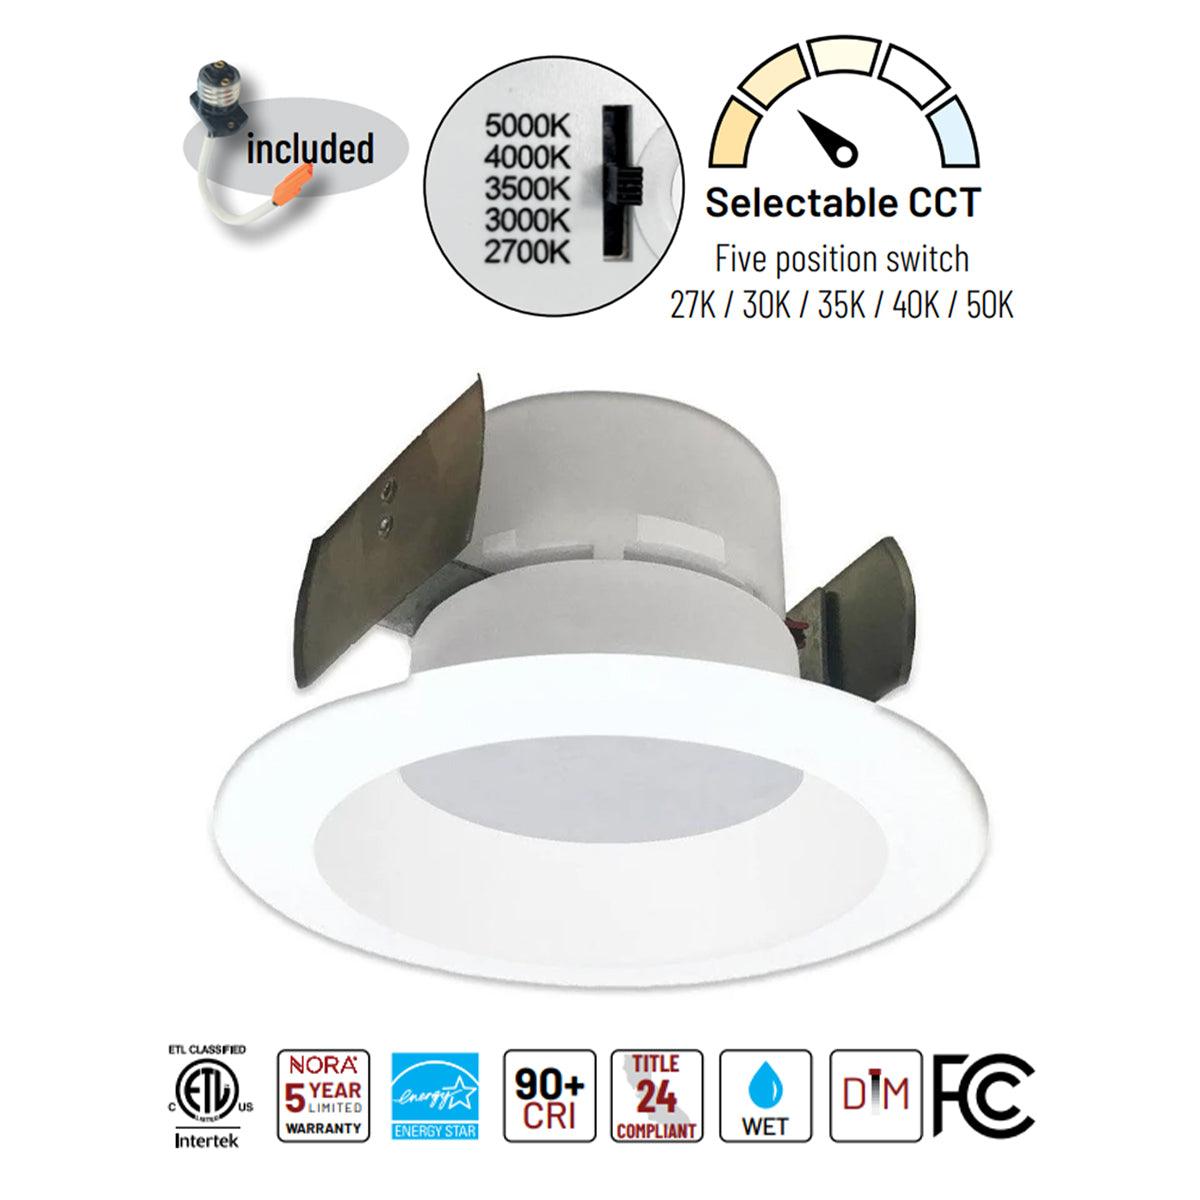 Onyx Recessed LED Can Light, 4 Inch, 10 Watt, 850 Lumens, Tunable White, 2700K to 5000K, Reflector Trim